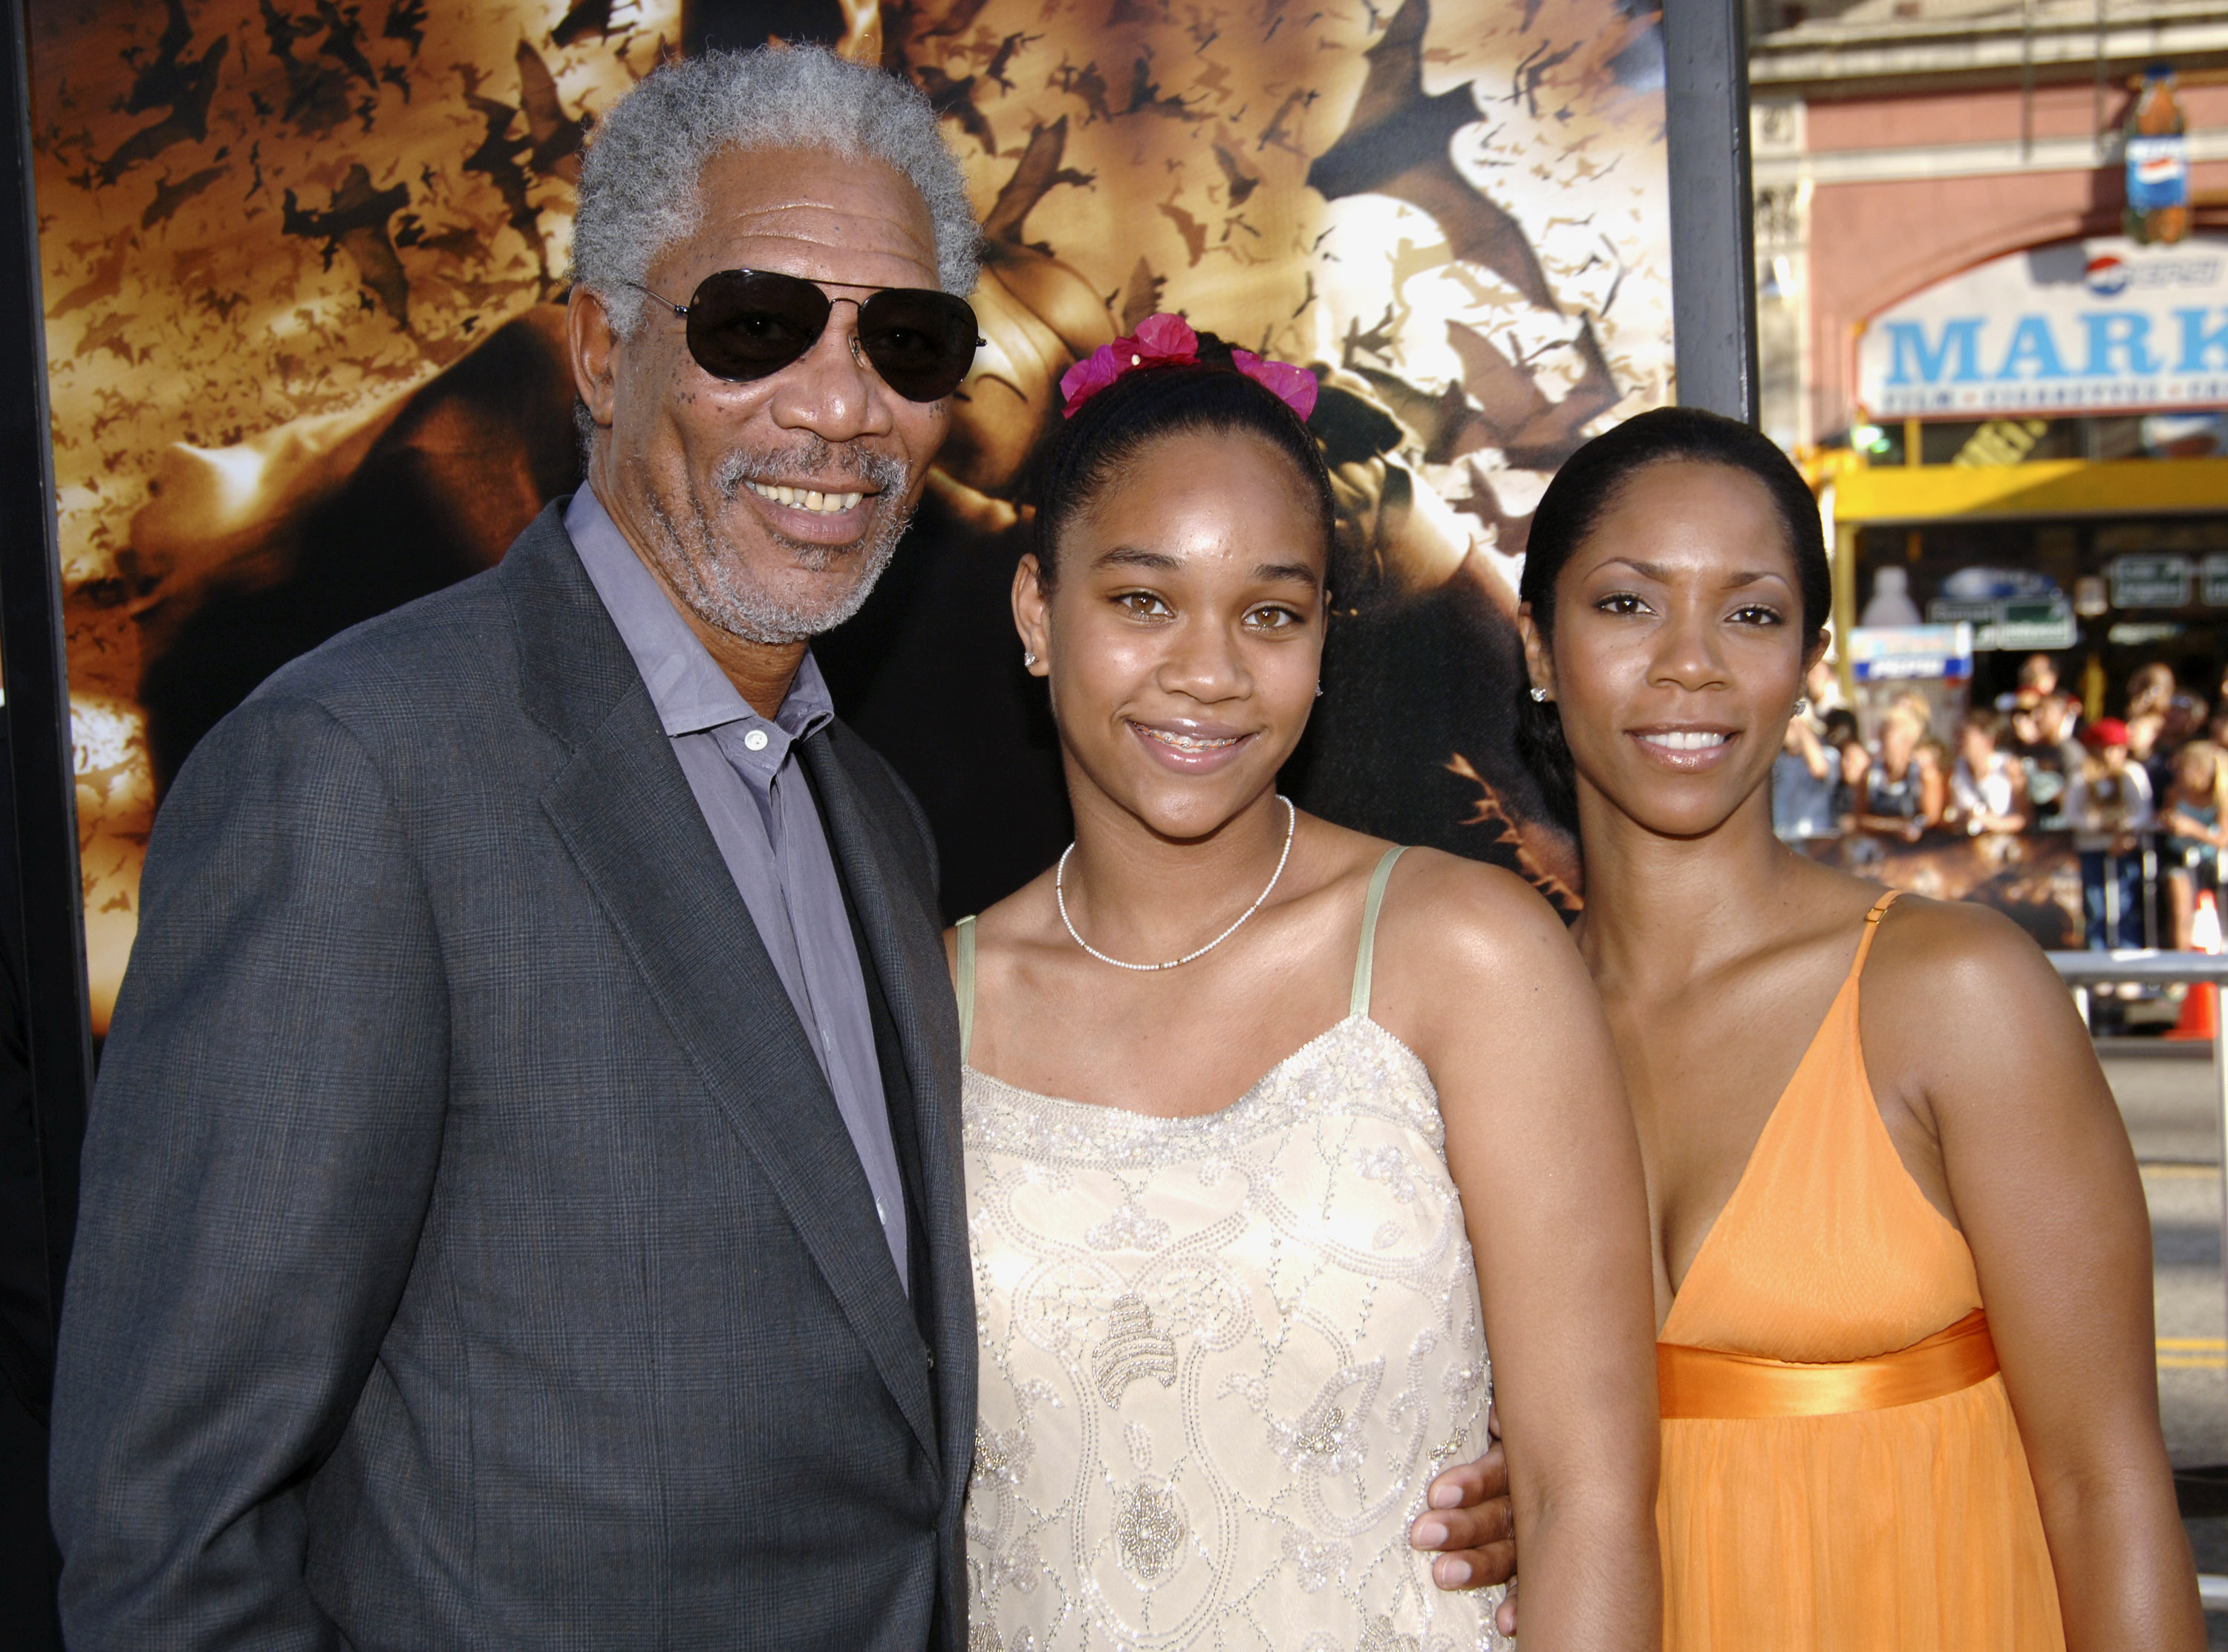 Morgan Freeman with granddaughter Alexis and daughter Morgana Freeman in Los Angeles in 2005 | Source: Getty Images